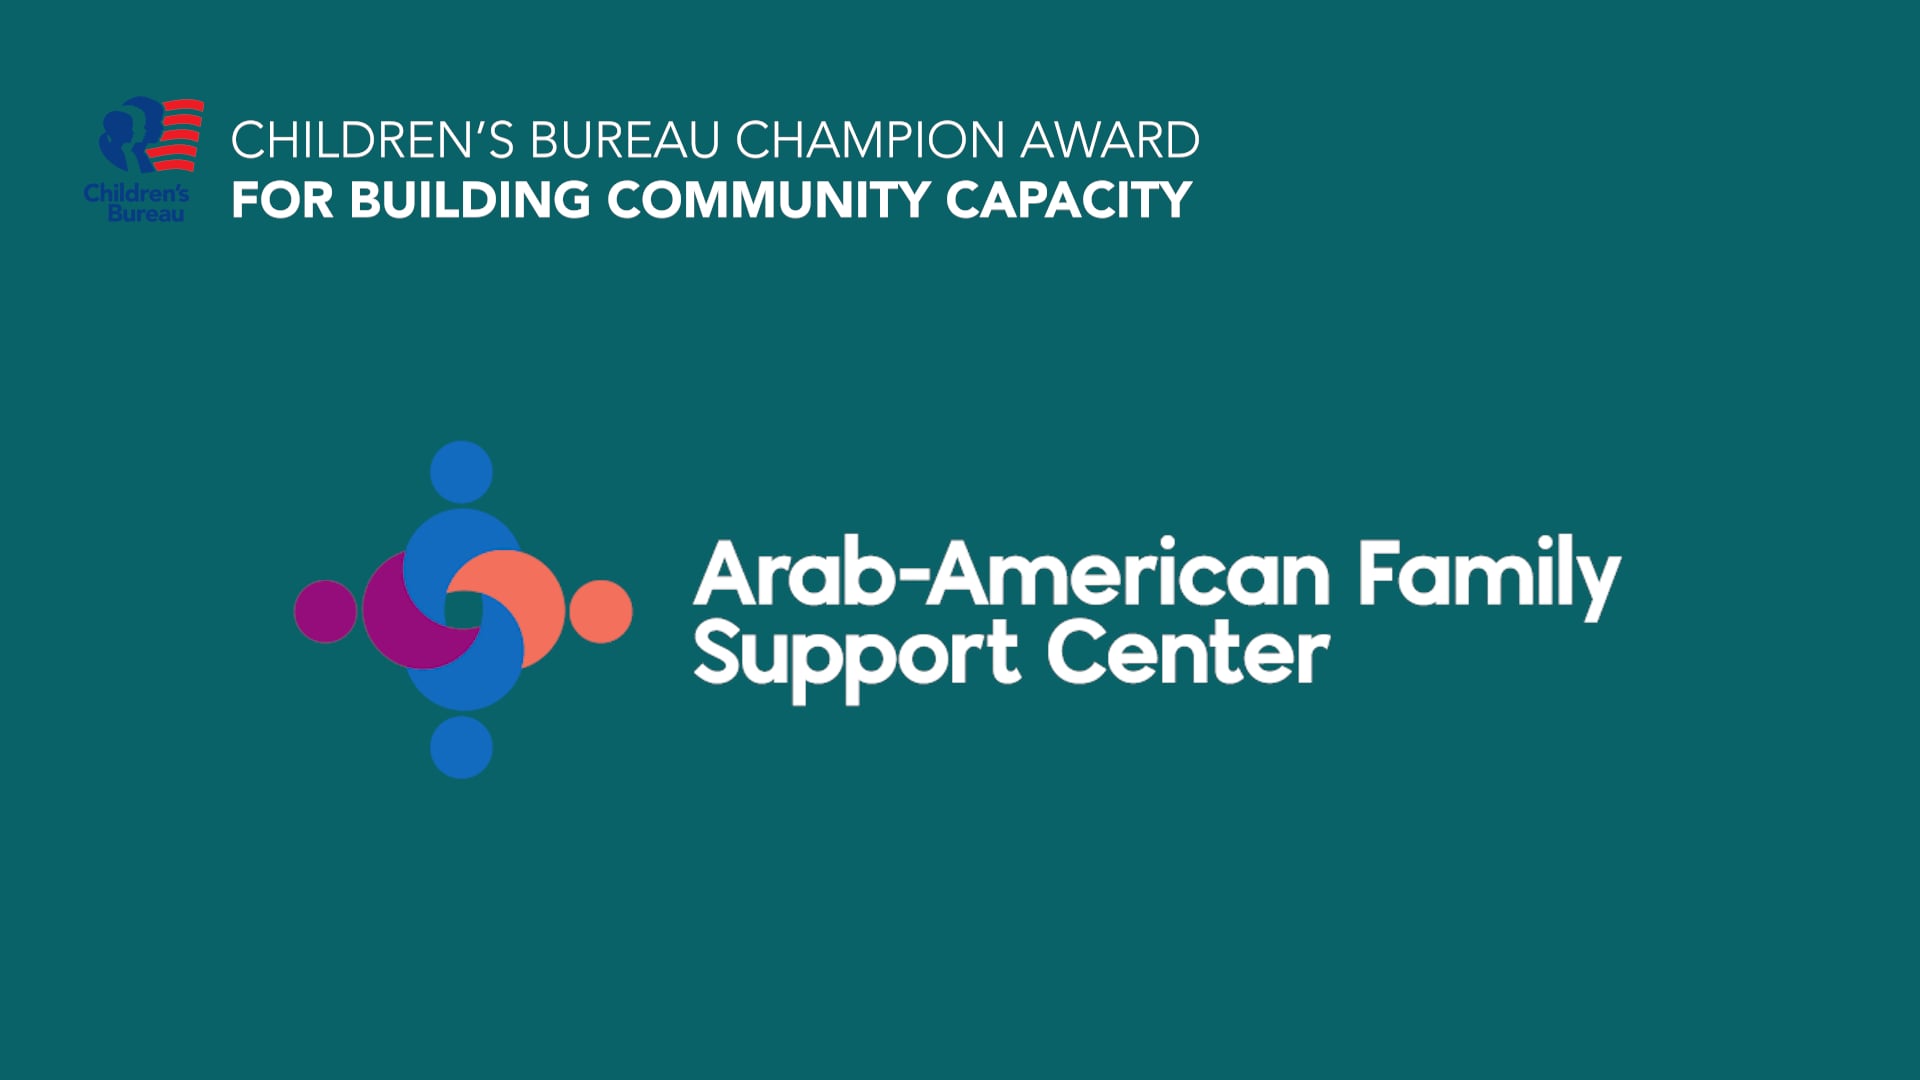 Click to watch the Arab-American Family Support Center video